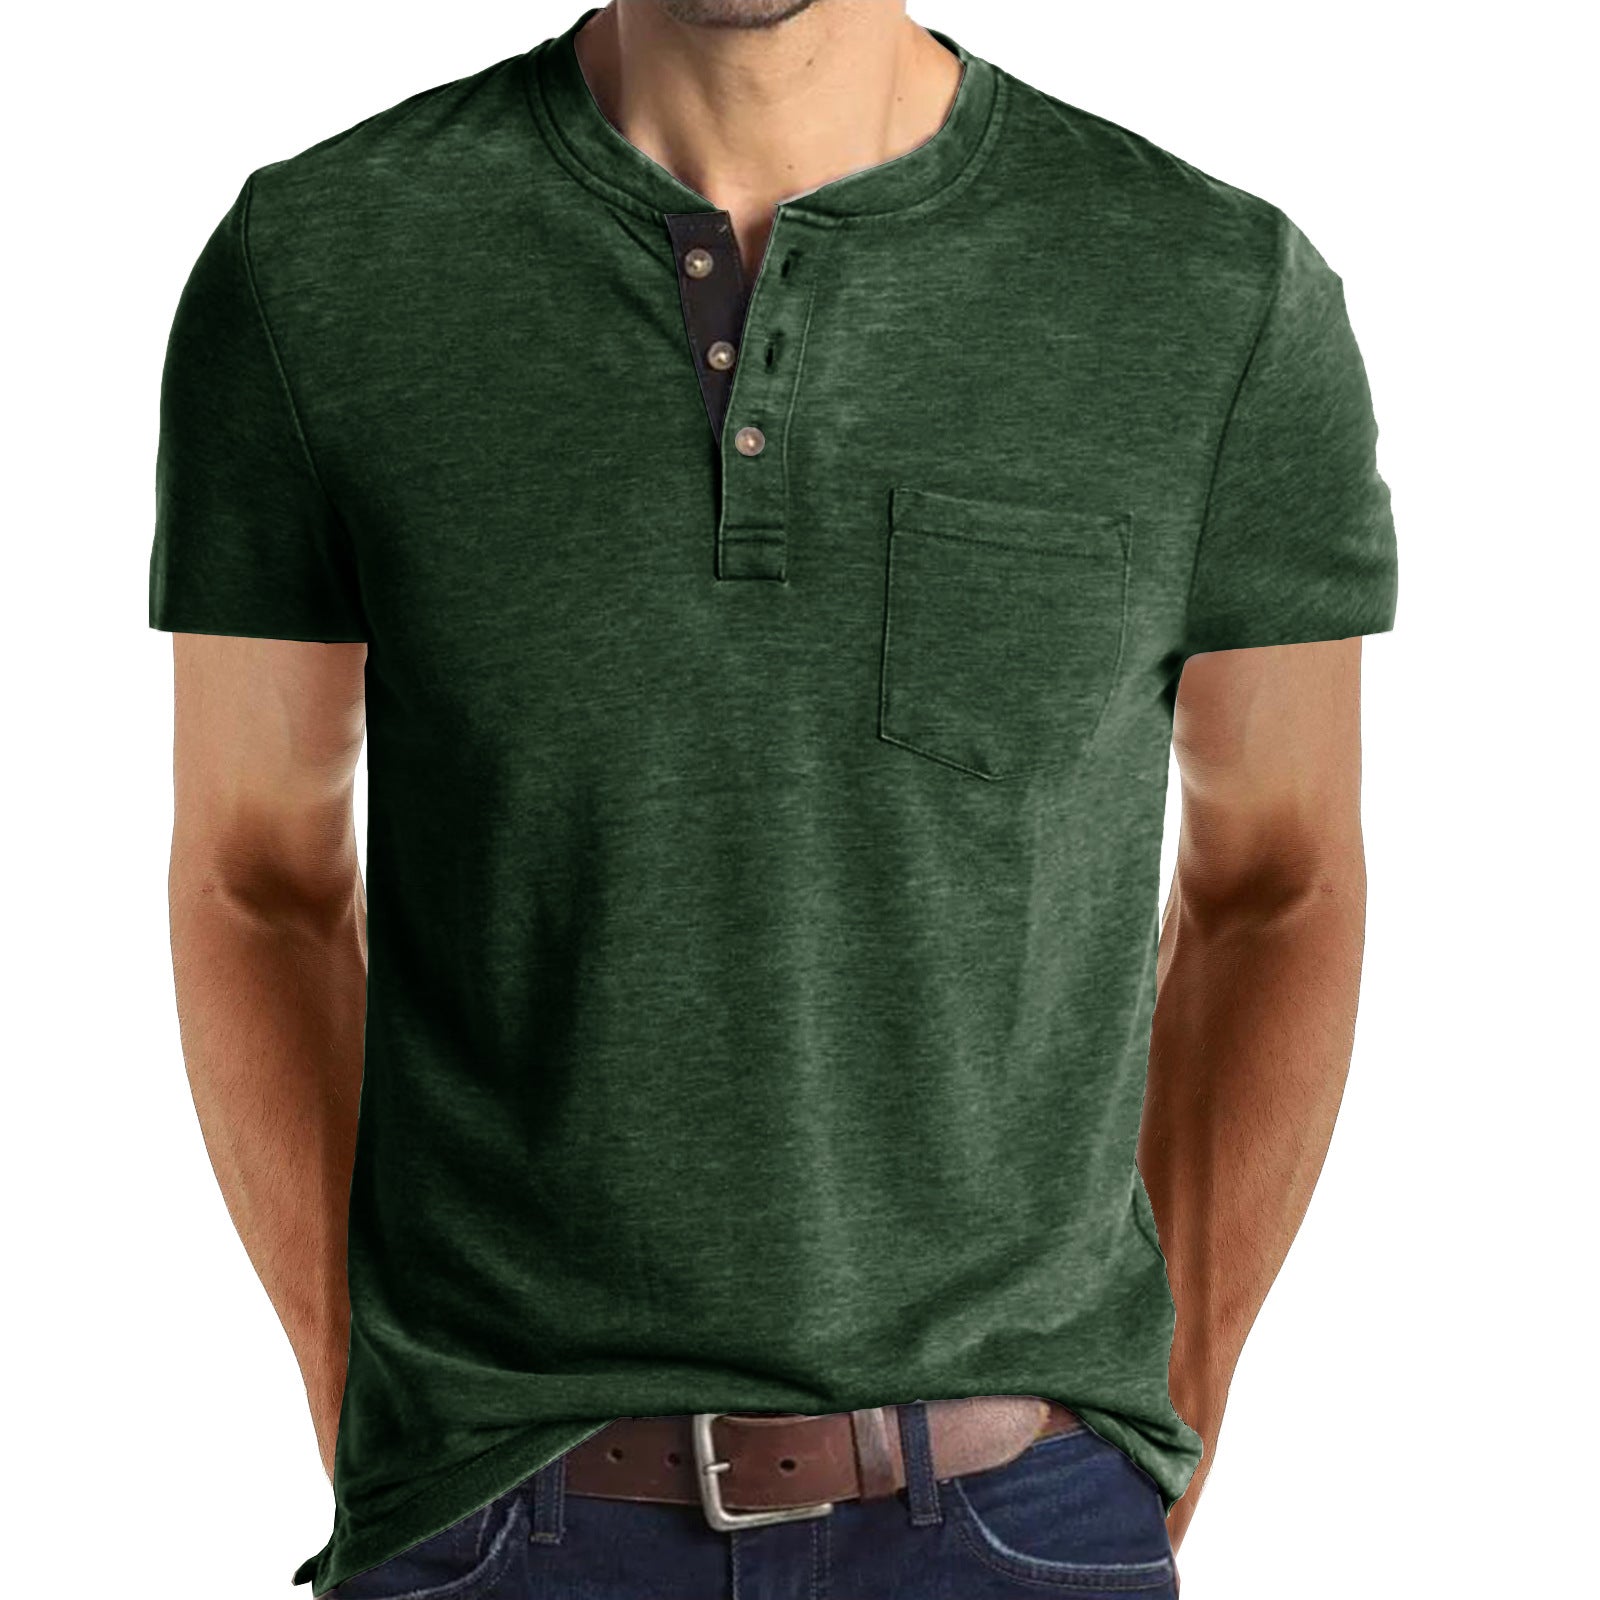 Men's Henley Button Cotton T-shirts With Pocket